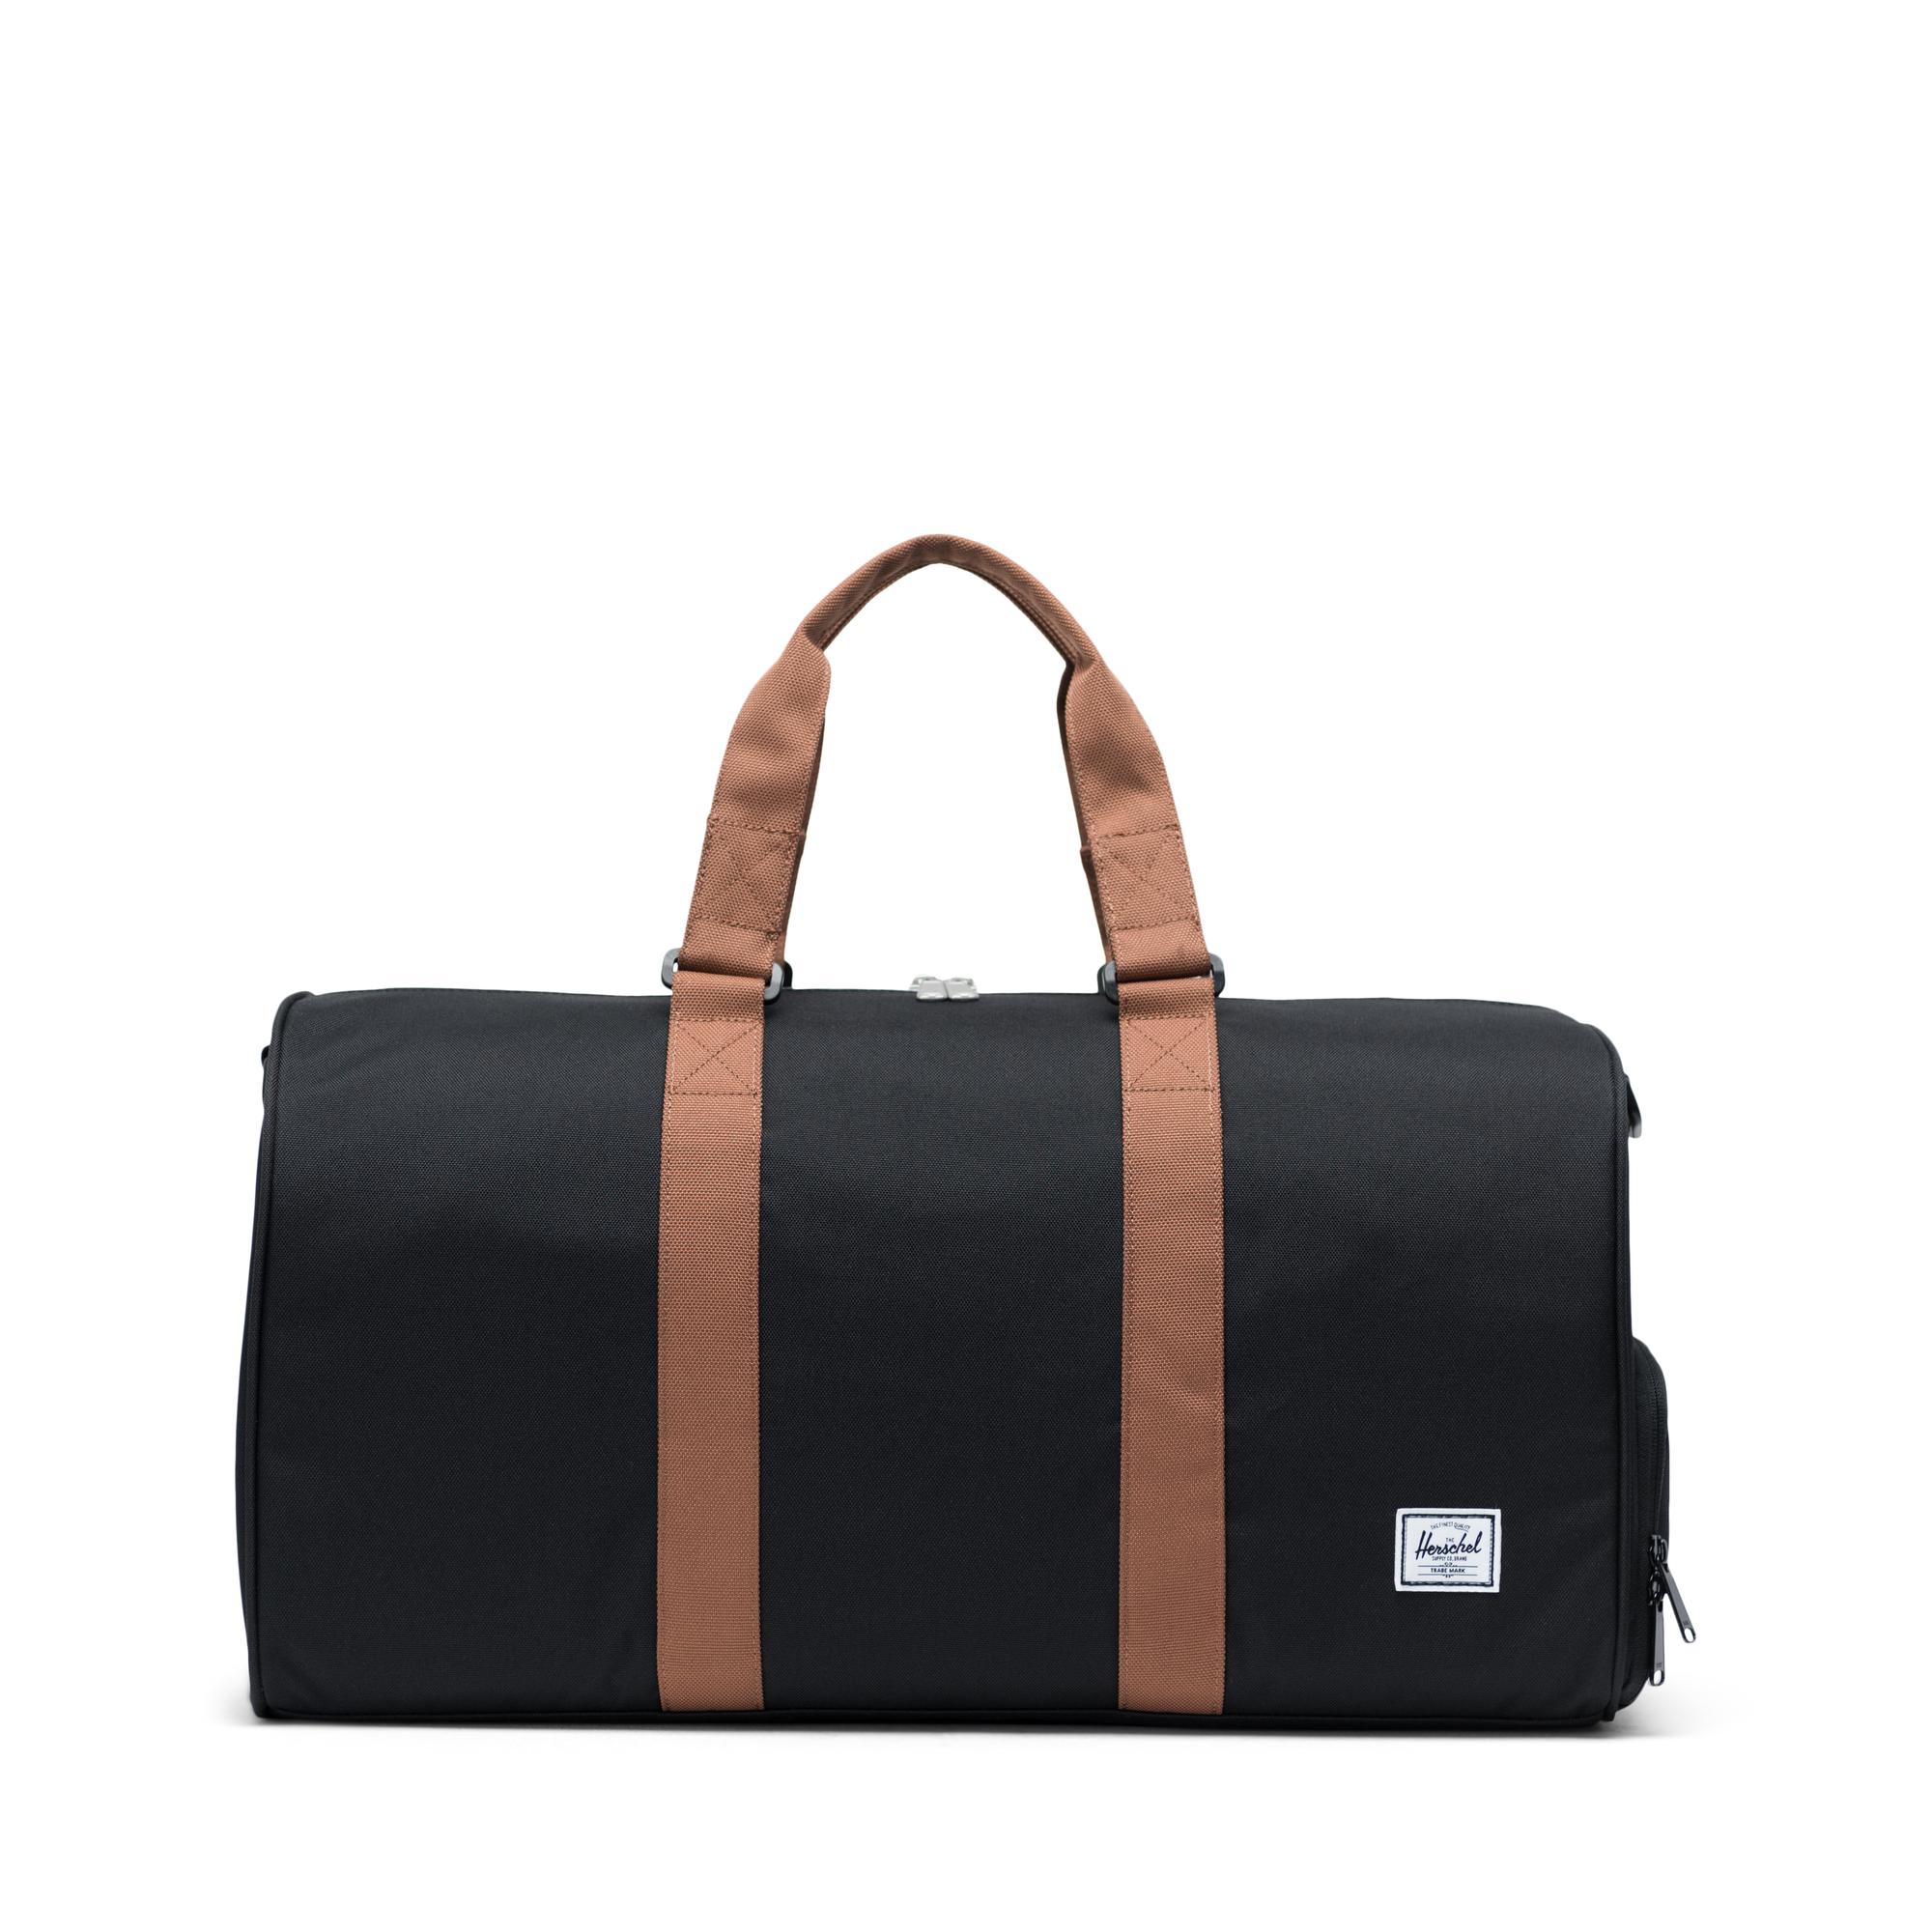 Lawson Backpack Woven | Herschel Supply Company